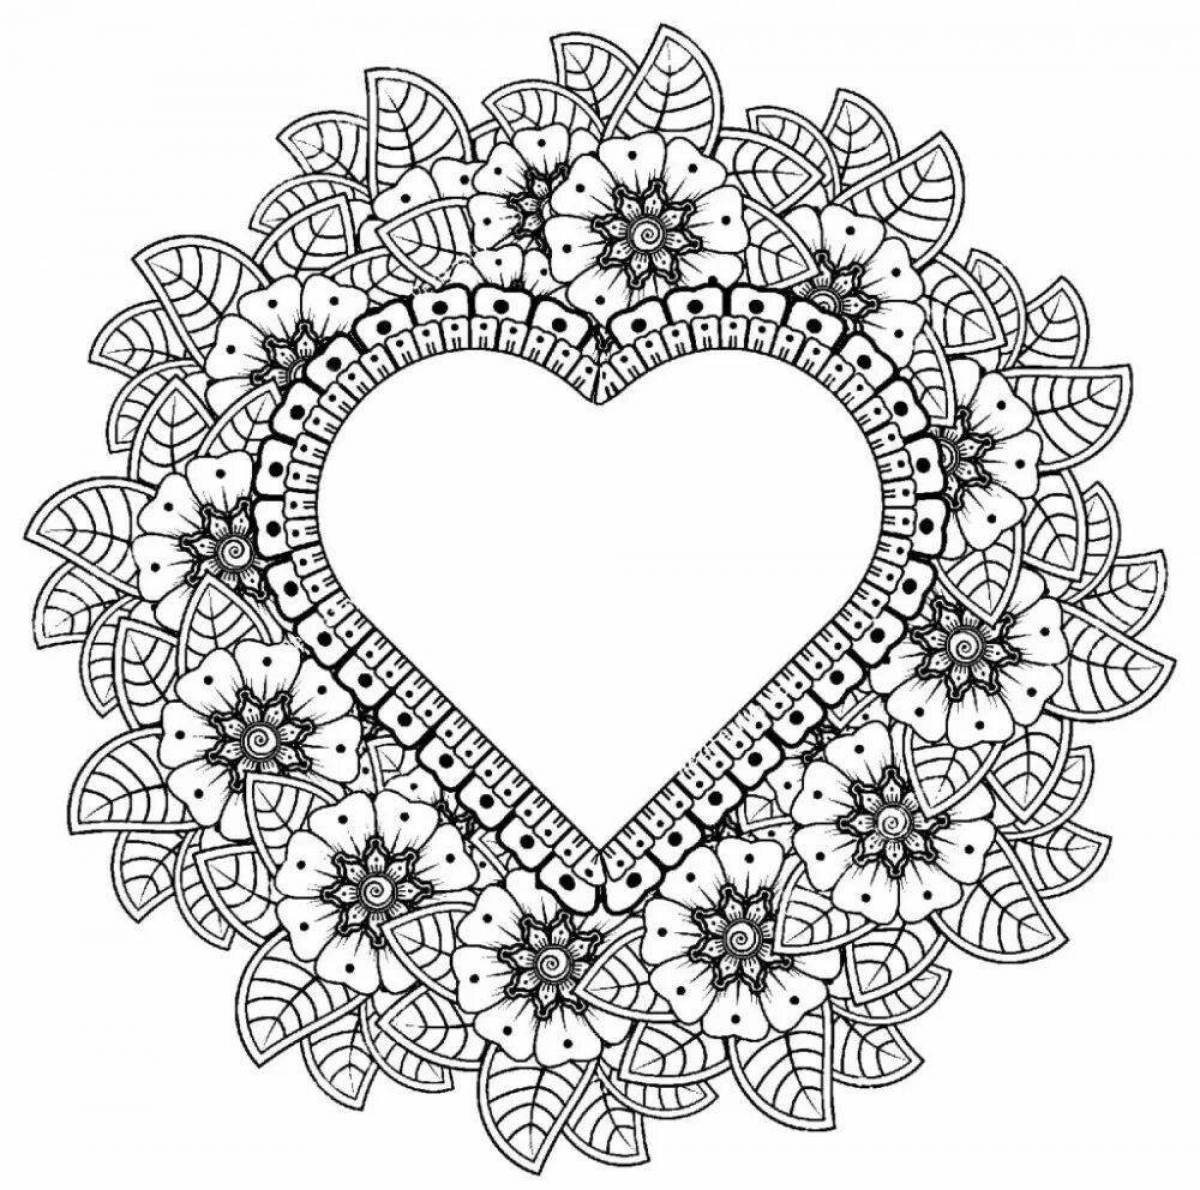 Exquisite heart by number coloring book